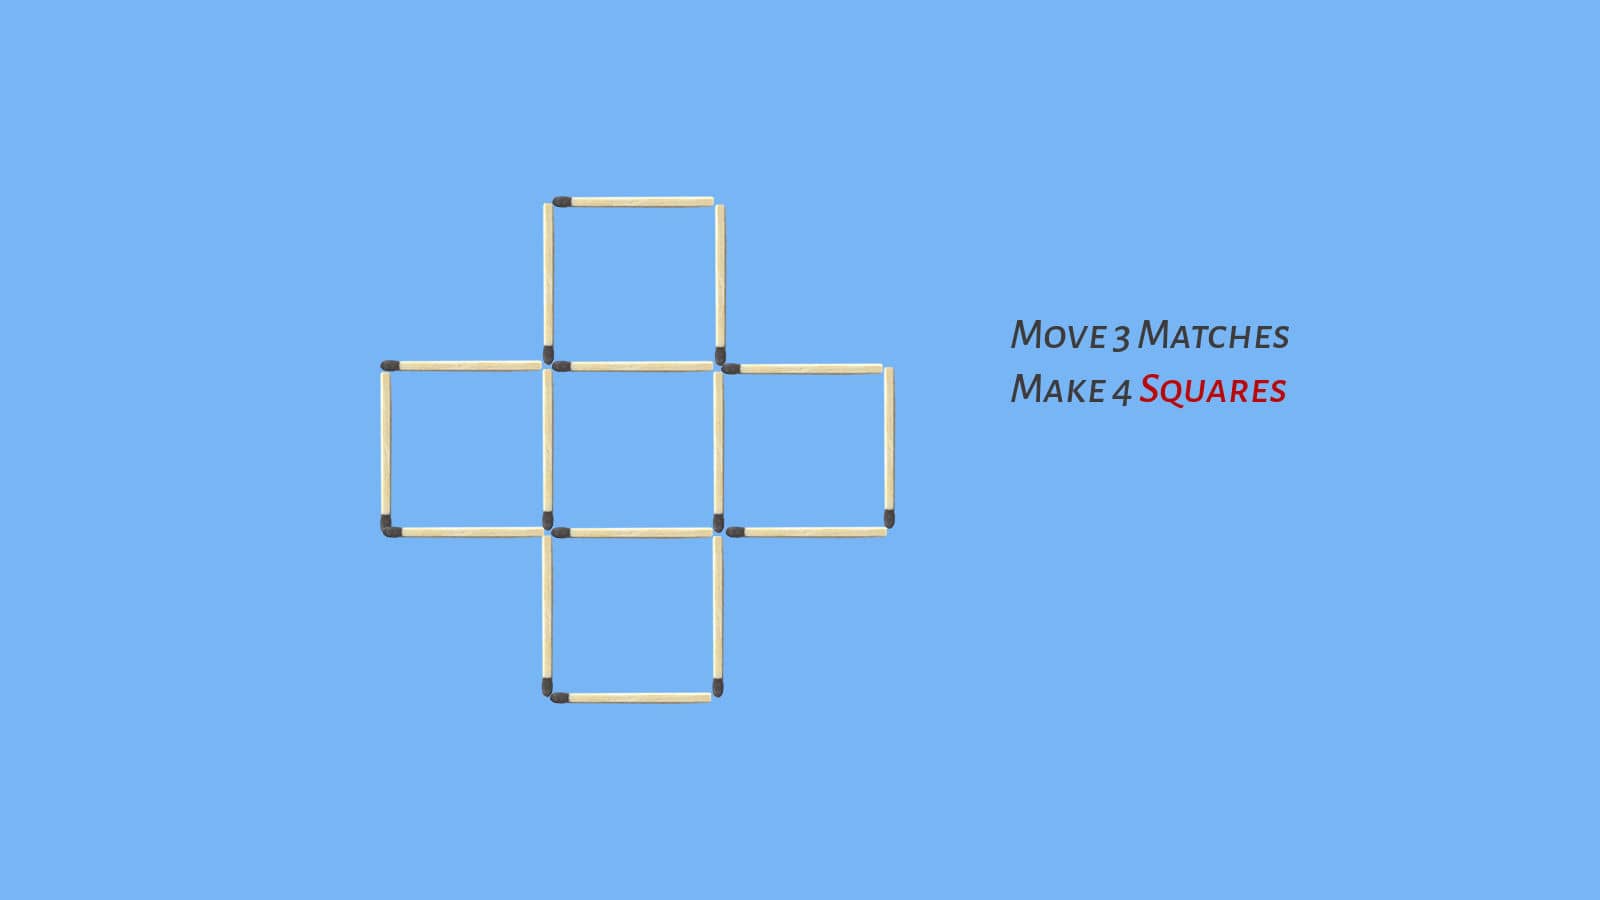 Move 3 matches to make 4 squares from 5 squares matchstick puzzle figure